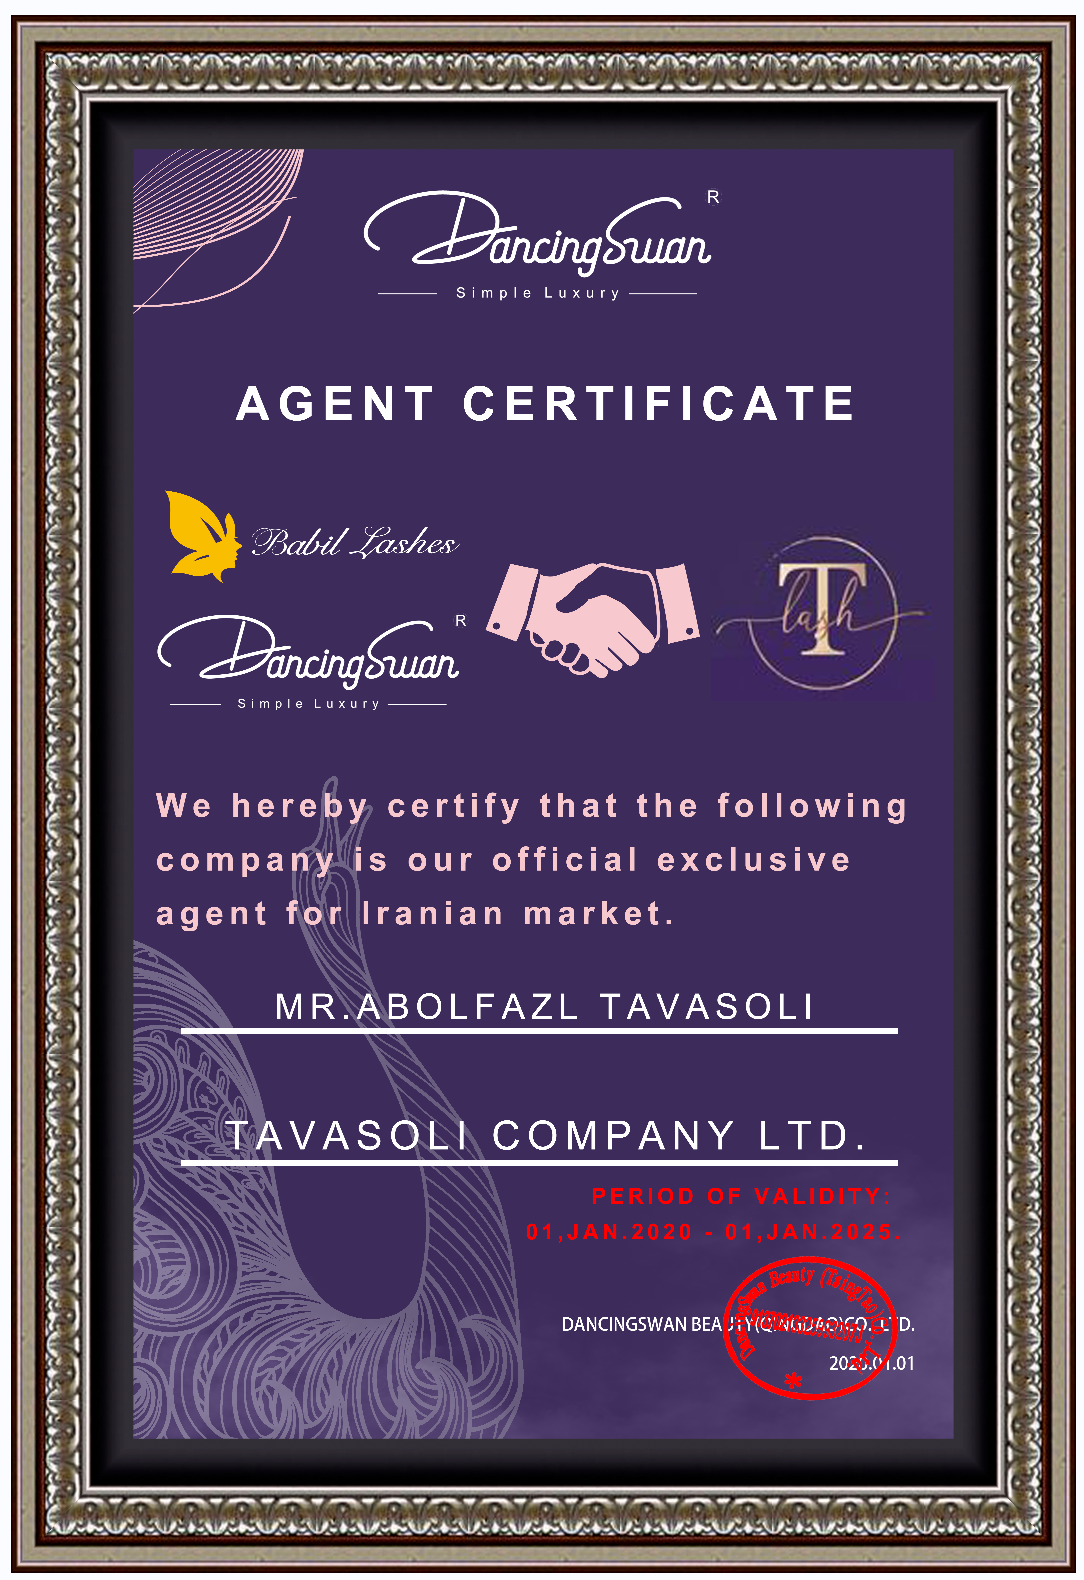 Agent Certificate.png